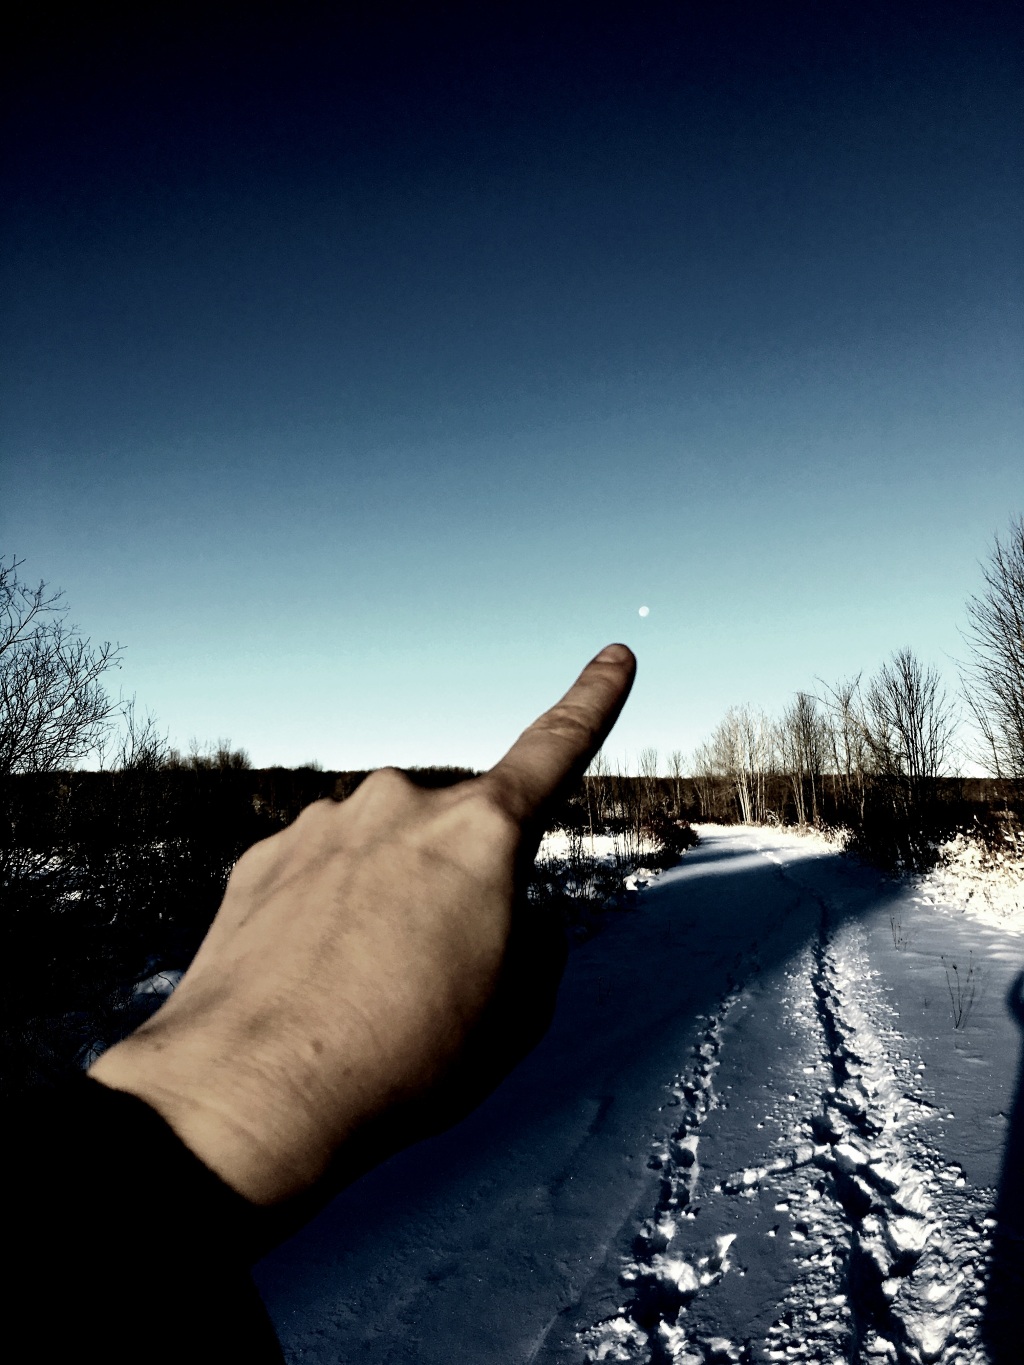 Finger pointing to the moon in the sky with a snowy trail in the background